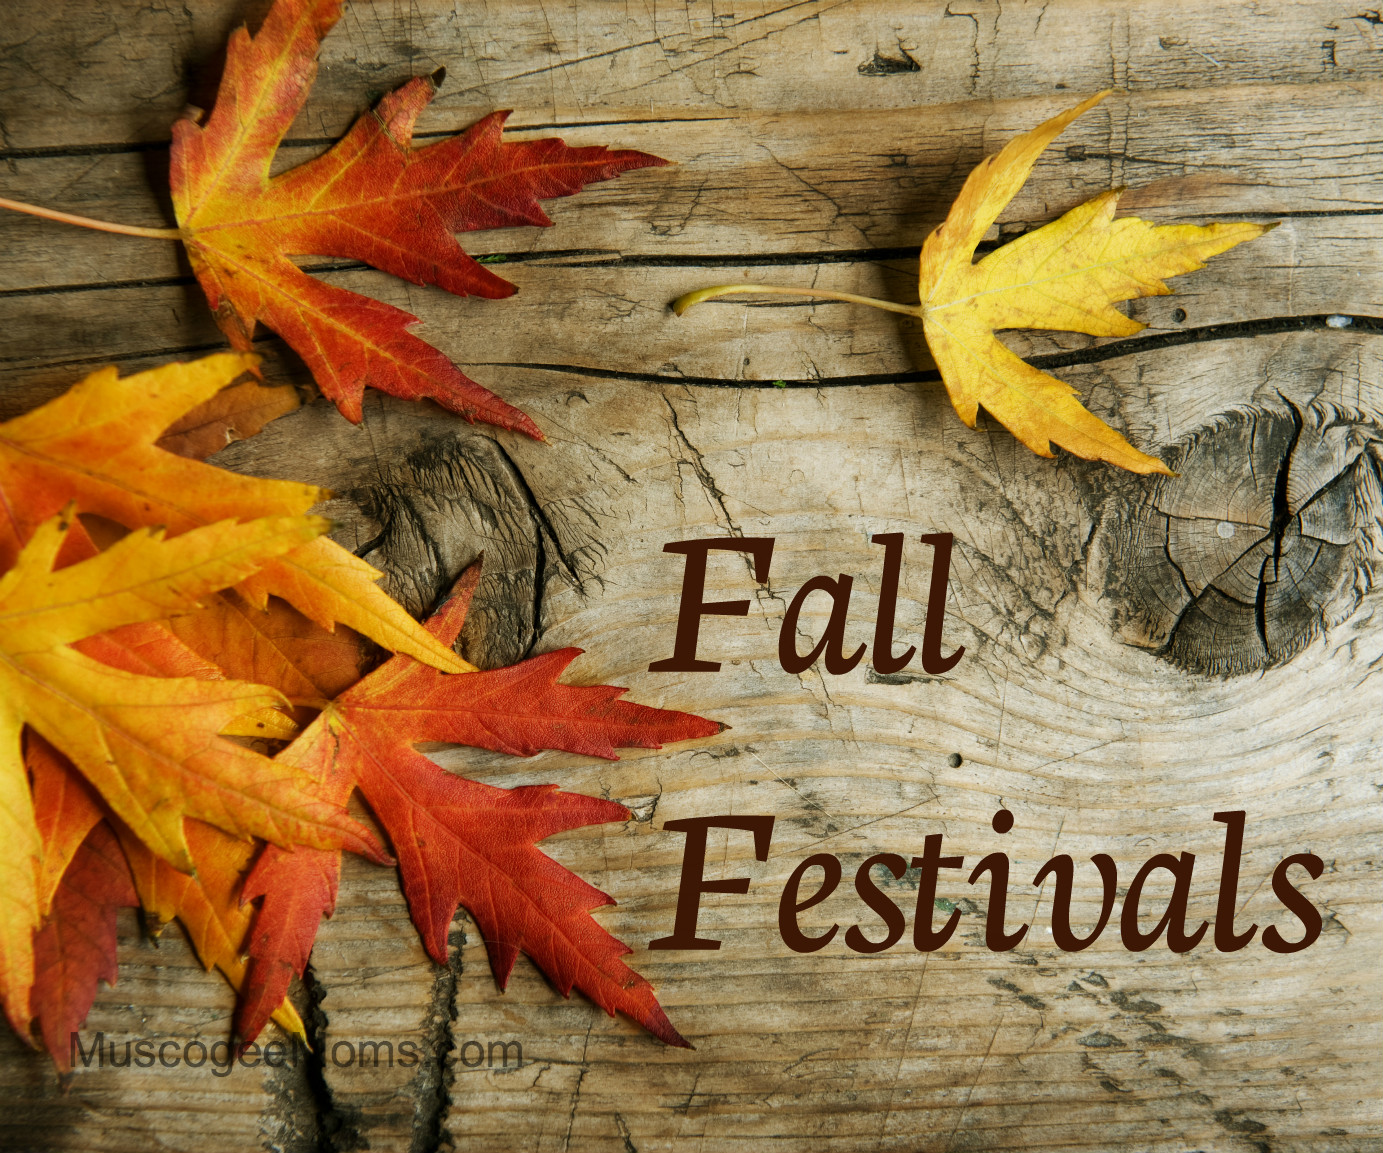 Fall Festivals Guide - Muscogee Moms | Local Events, Parenting Tips ...